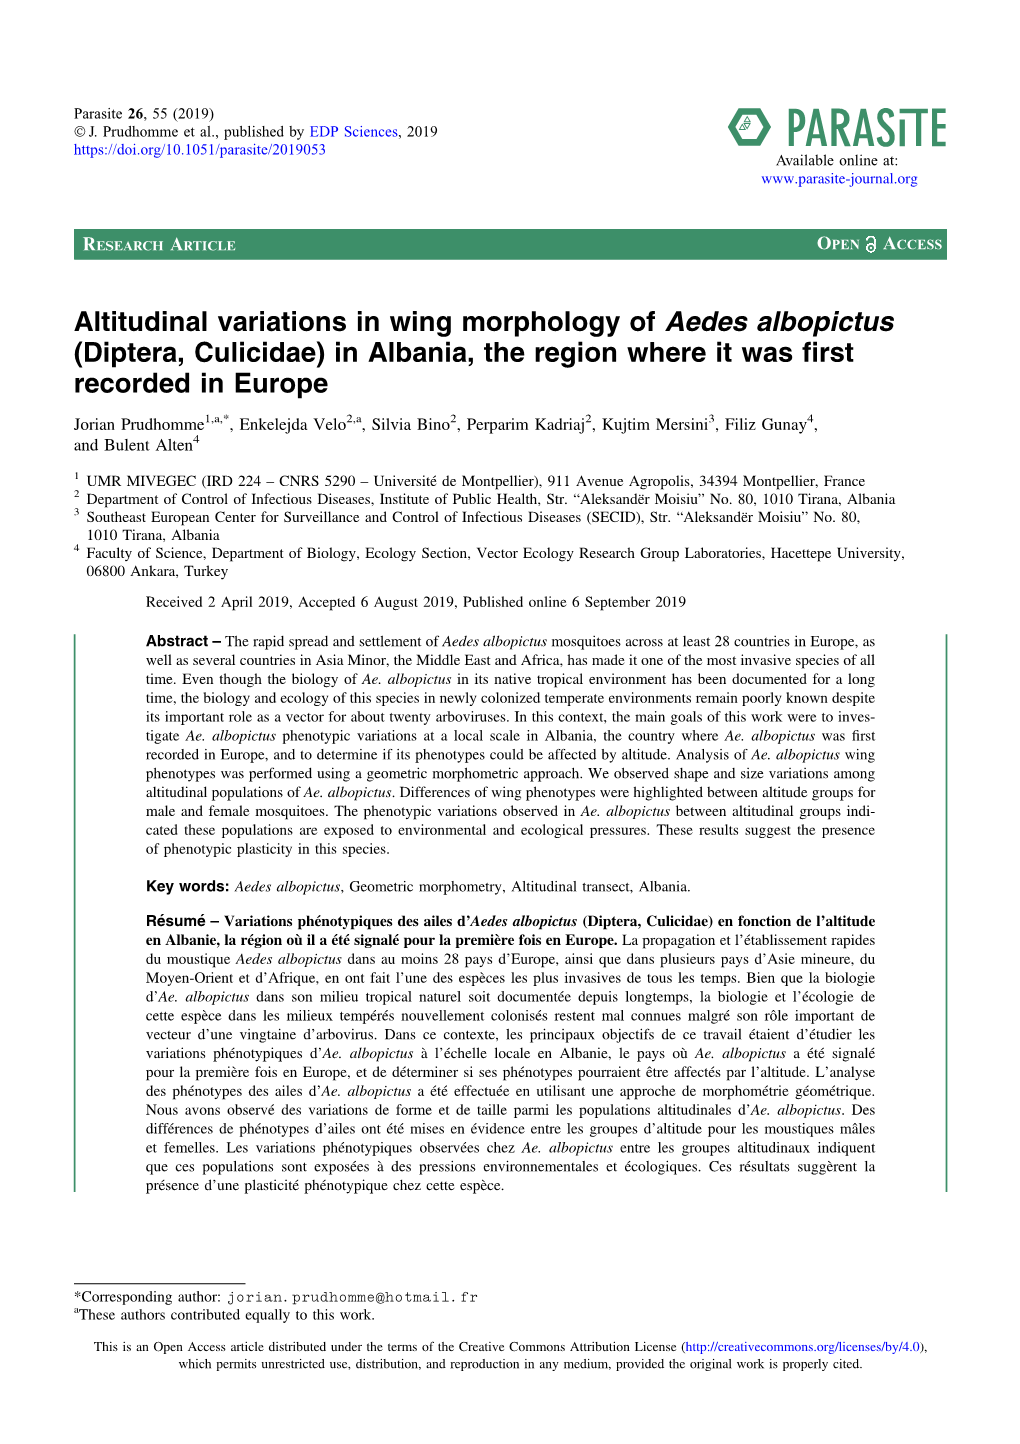 Altitudinal Variations in Wing Morphology of Aedes Albopictus (Diptera, Culicidae) in Albania, the Region Where It Was ﬁrst Recorded in Europe